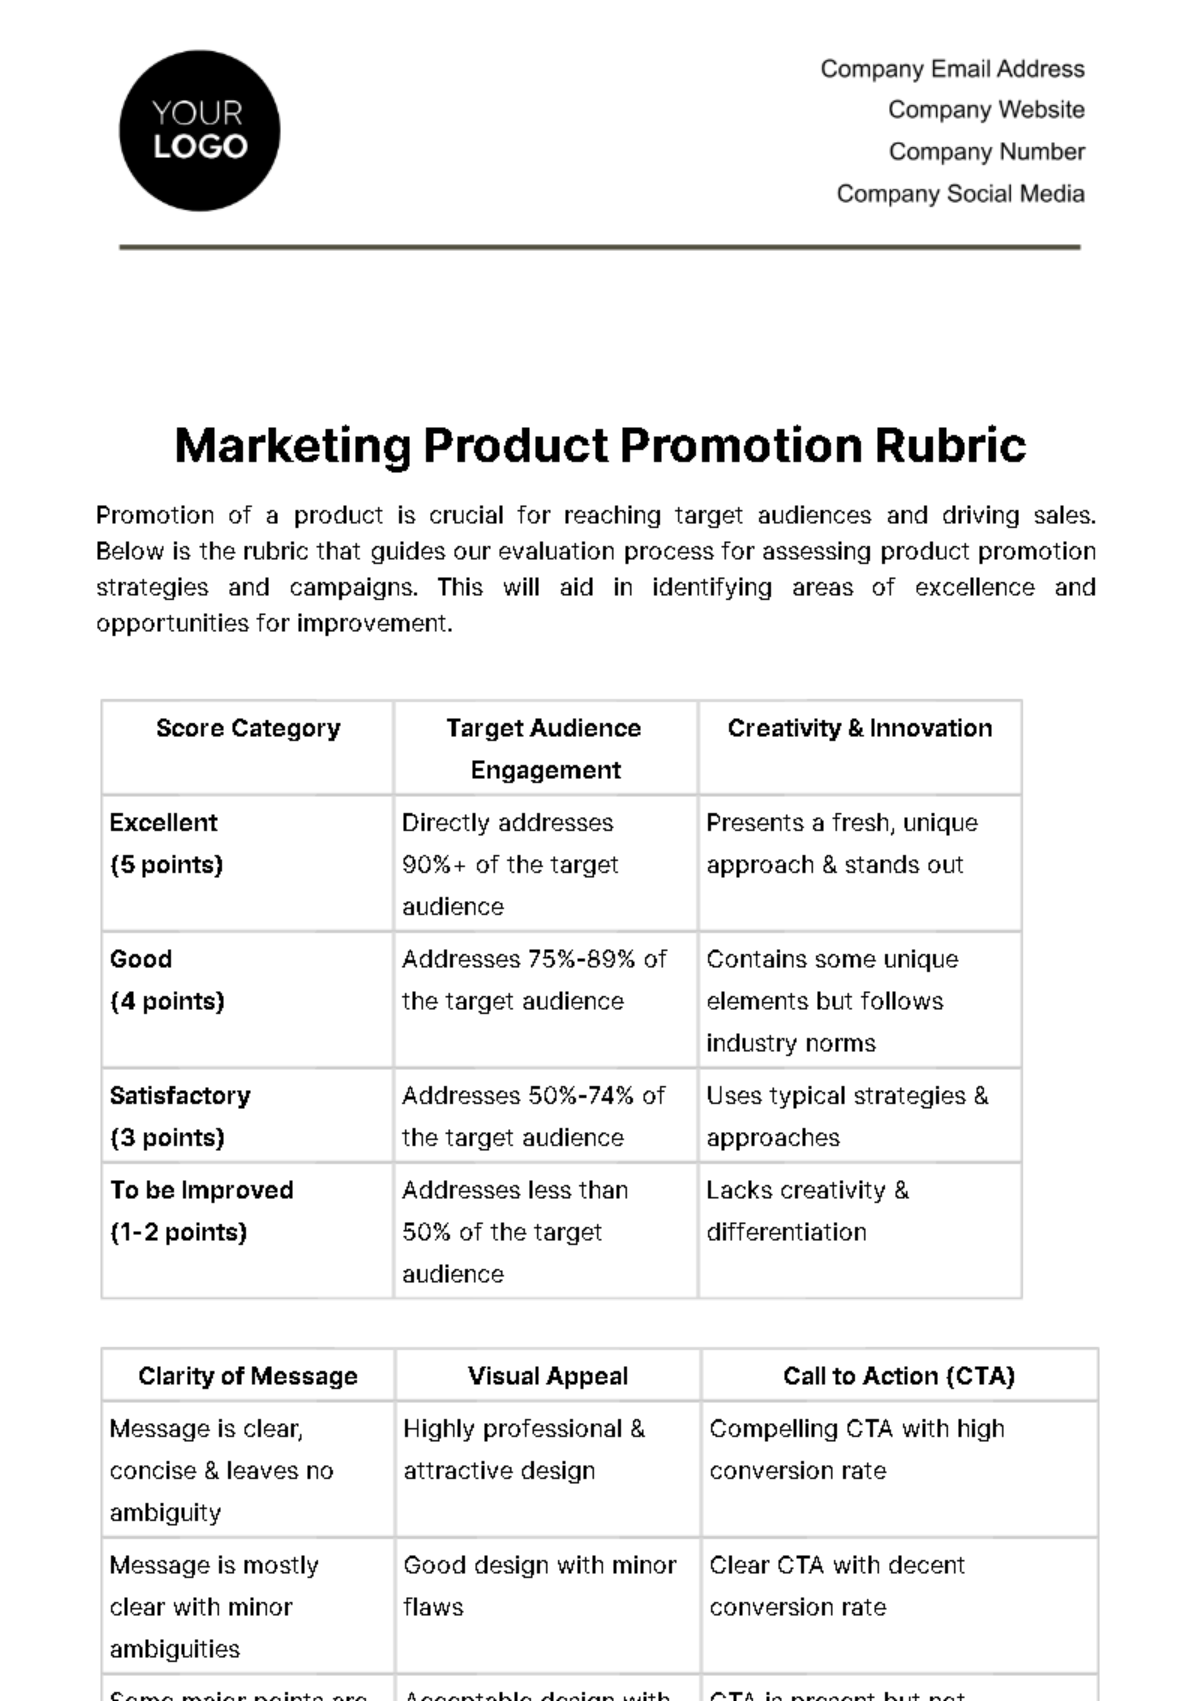 Free Marketing Product Promotion Rubric Template